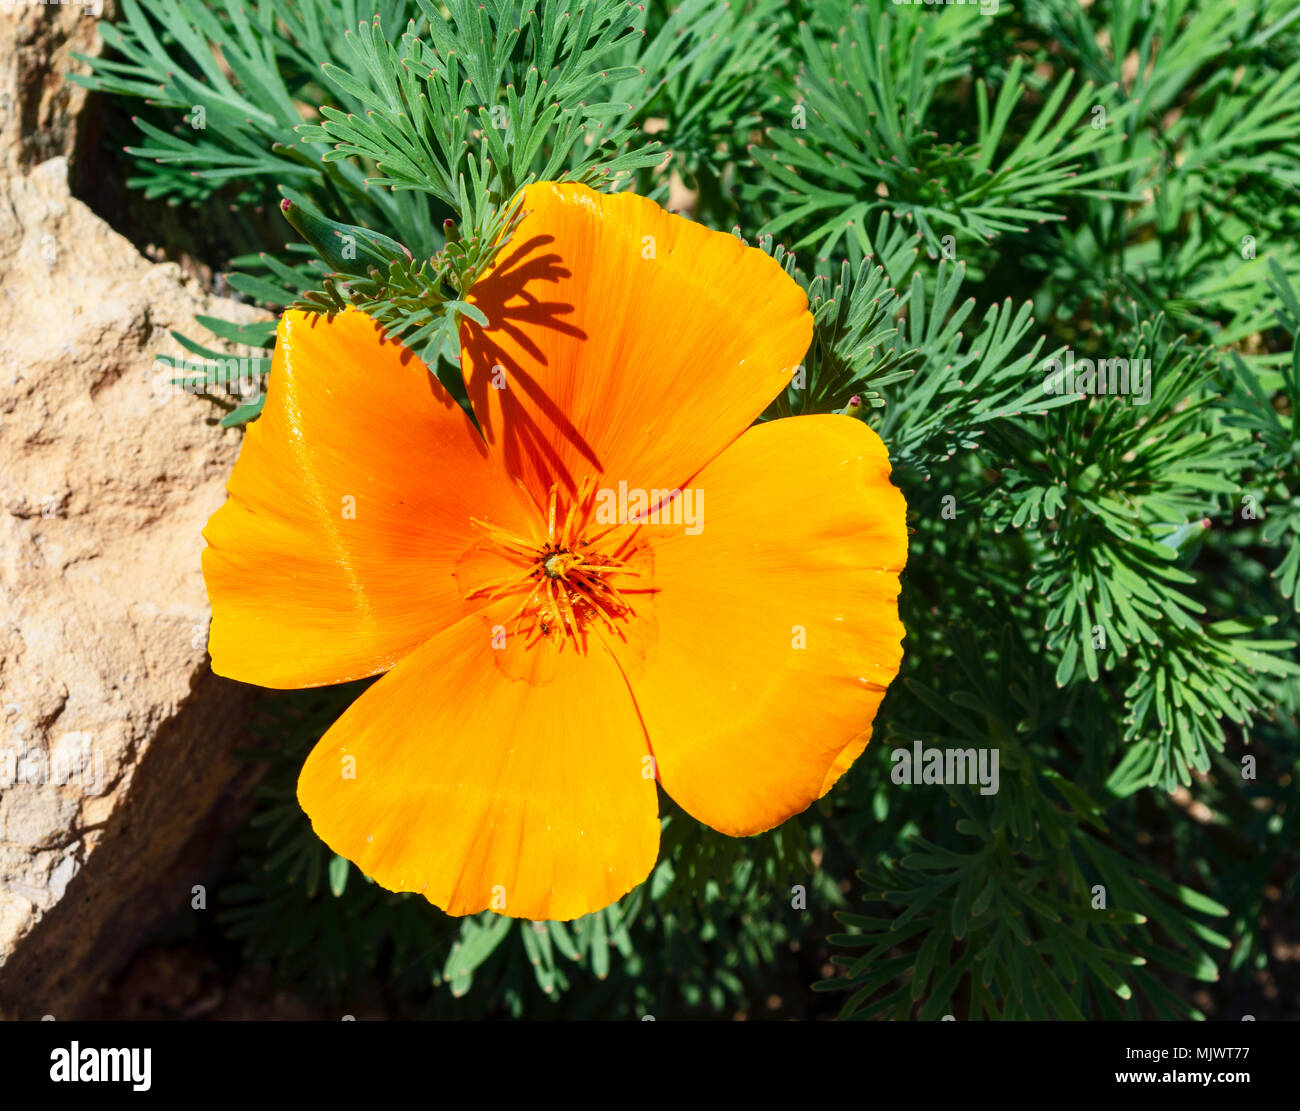 a bright orange california poppy flower and leaves next to a beige rock Stock Photo